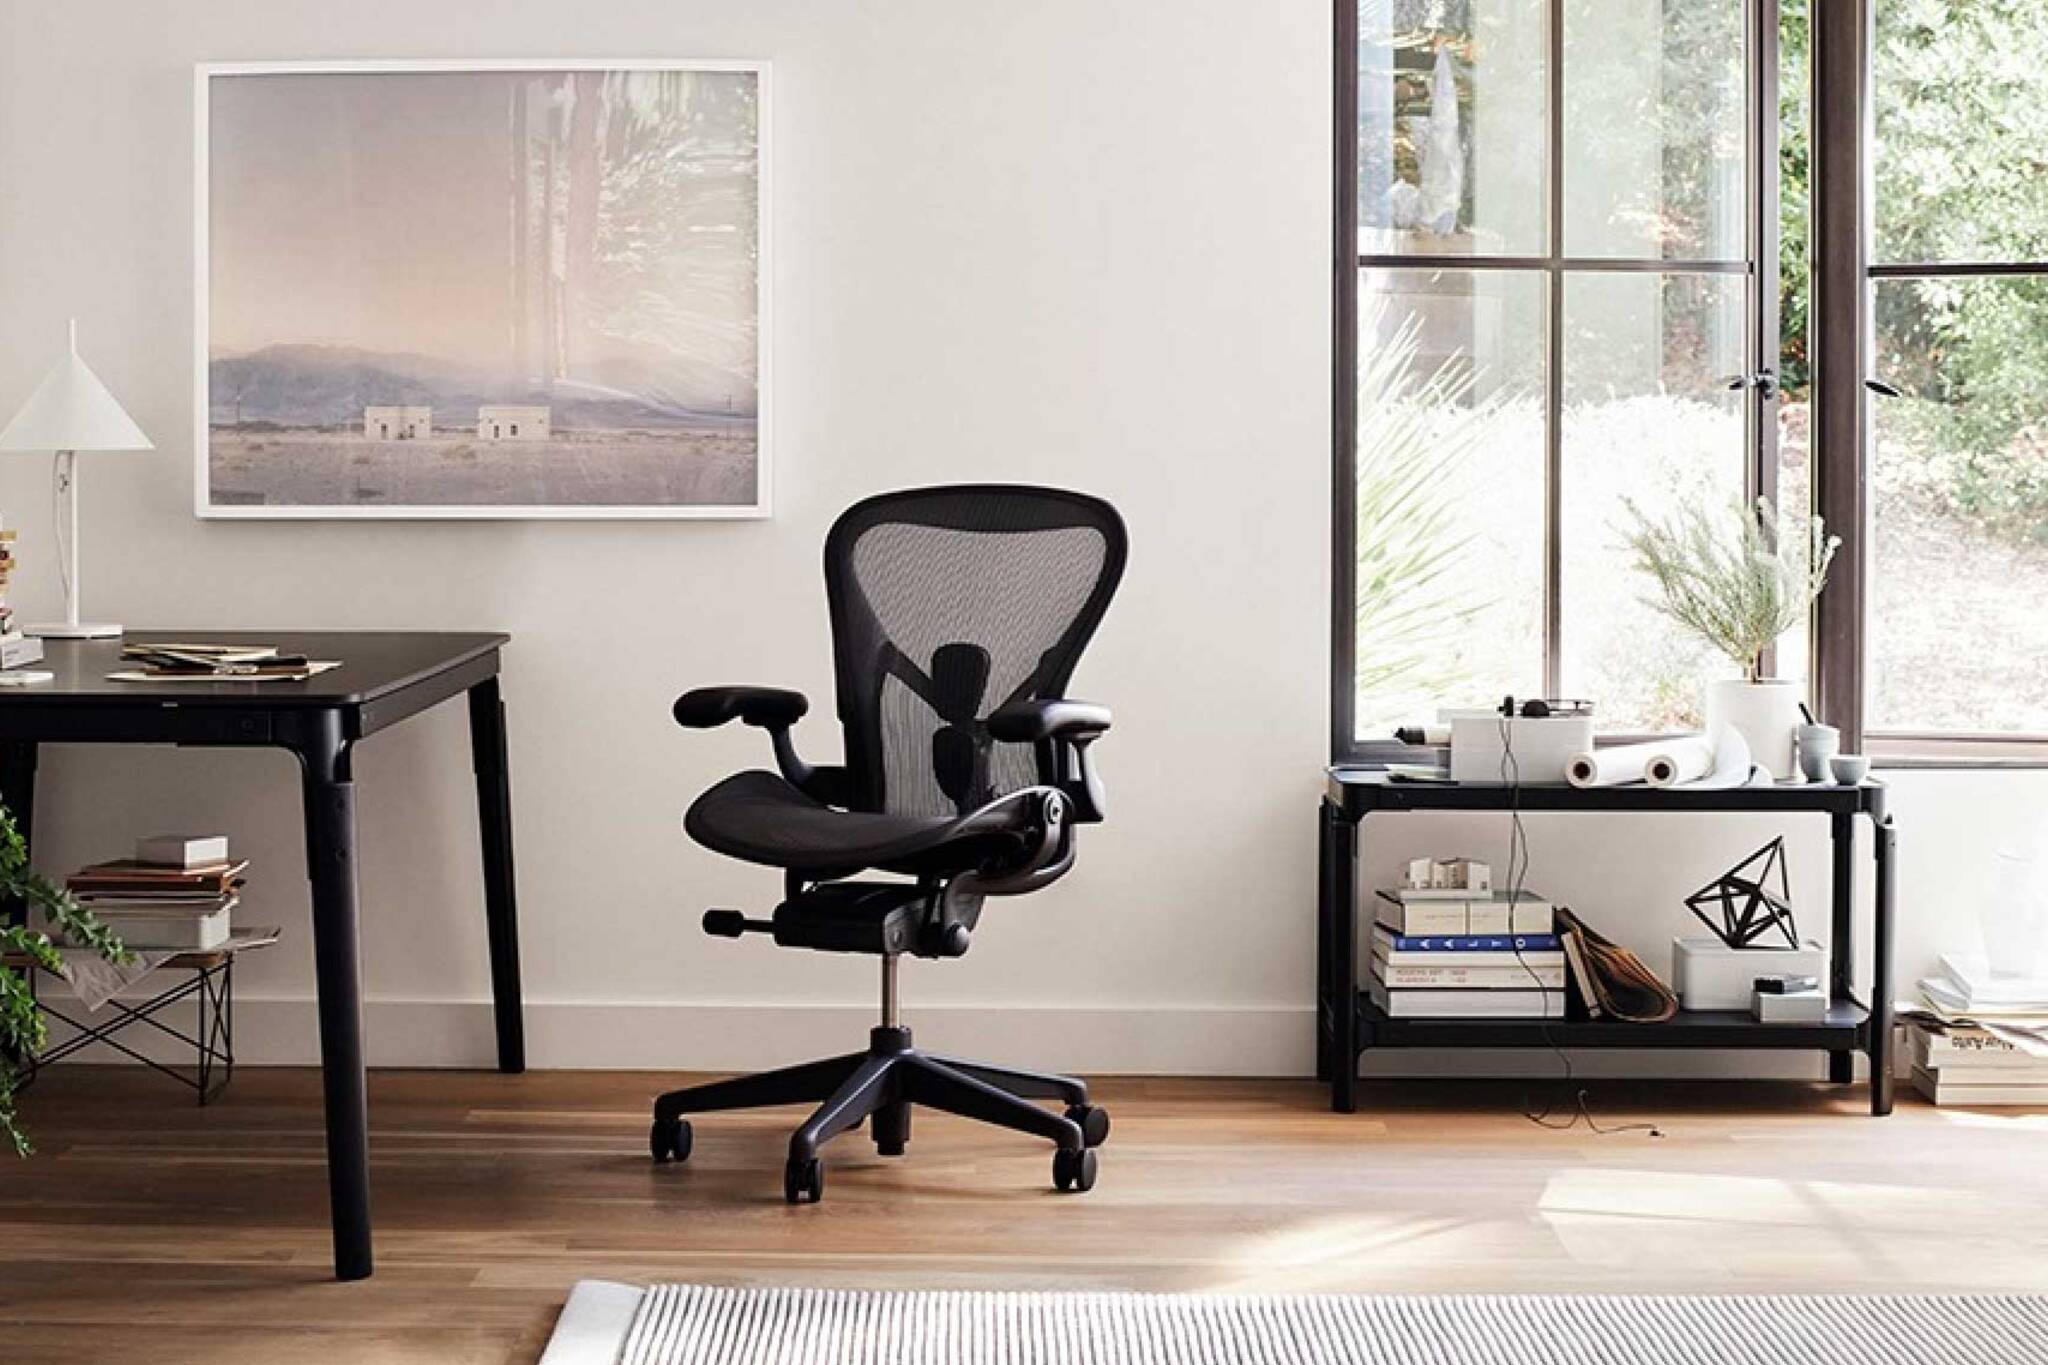 https://media.blogto.com/articles/2020410-home-office-chairs-2.jpg?w=2048&cmd=resize_then_crop&height=1365&quality=70